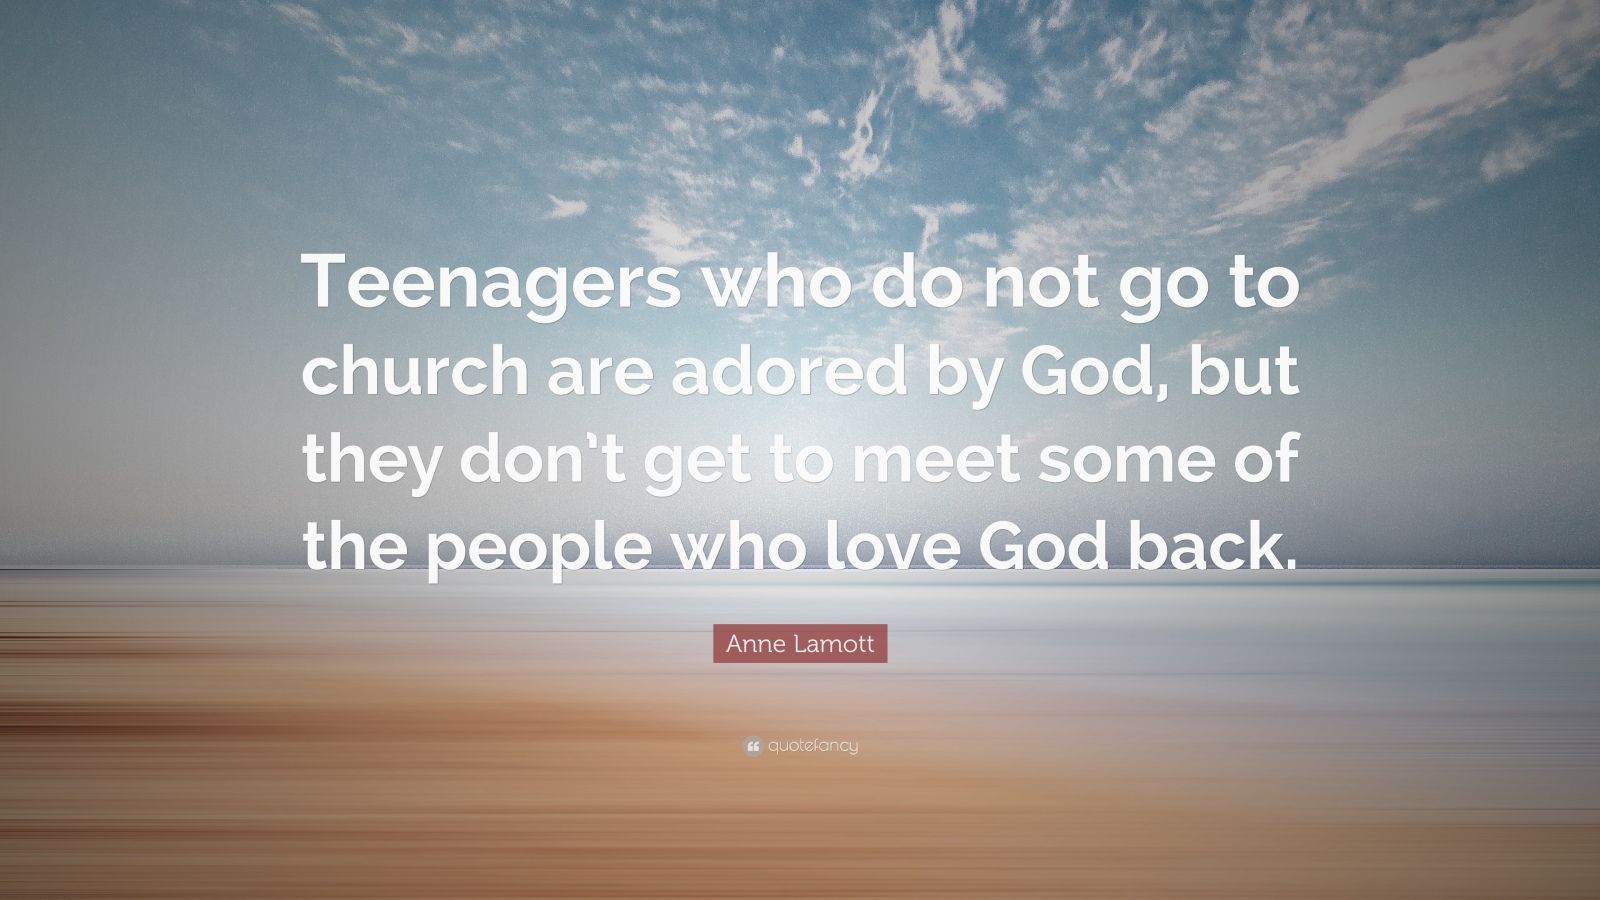 Anne Lamott Quote “teenagers Who Do Not Go To Church Are Adored By God But They Don T Get To